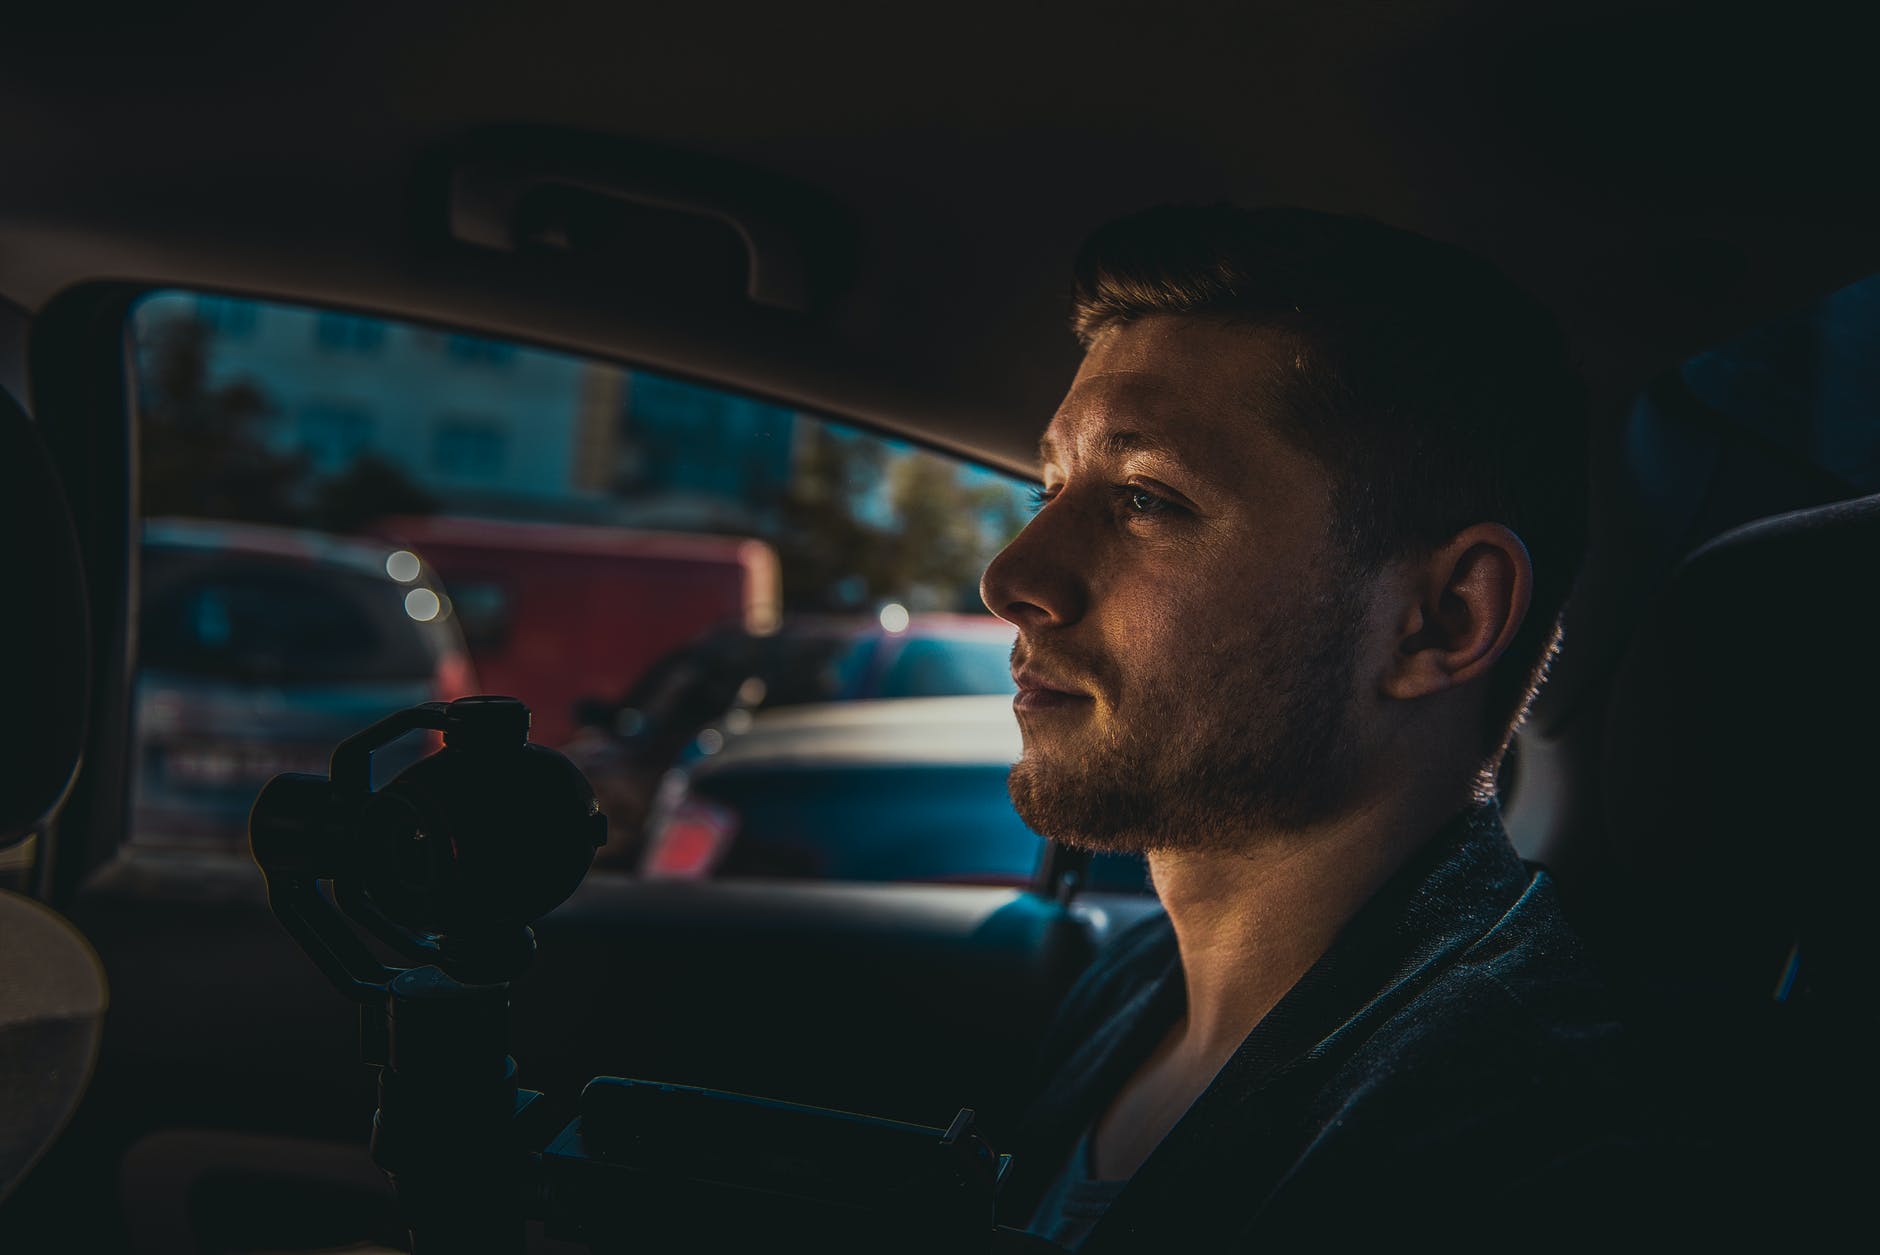 Karl got in the taxi and told the driver to take him to the airport. | Source: Pexels